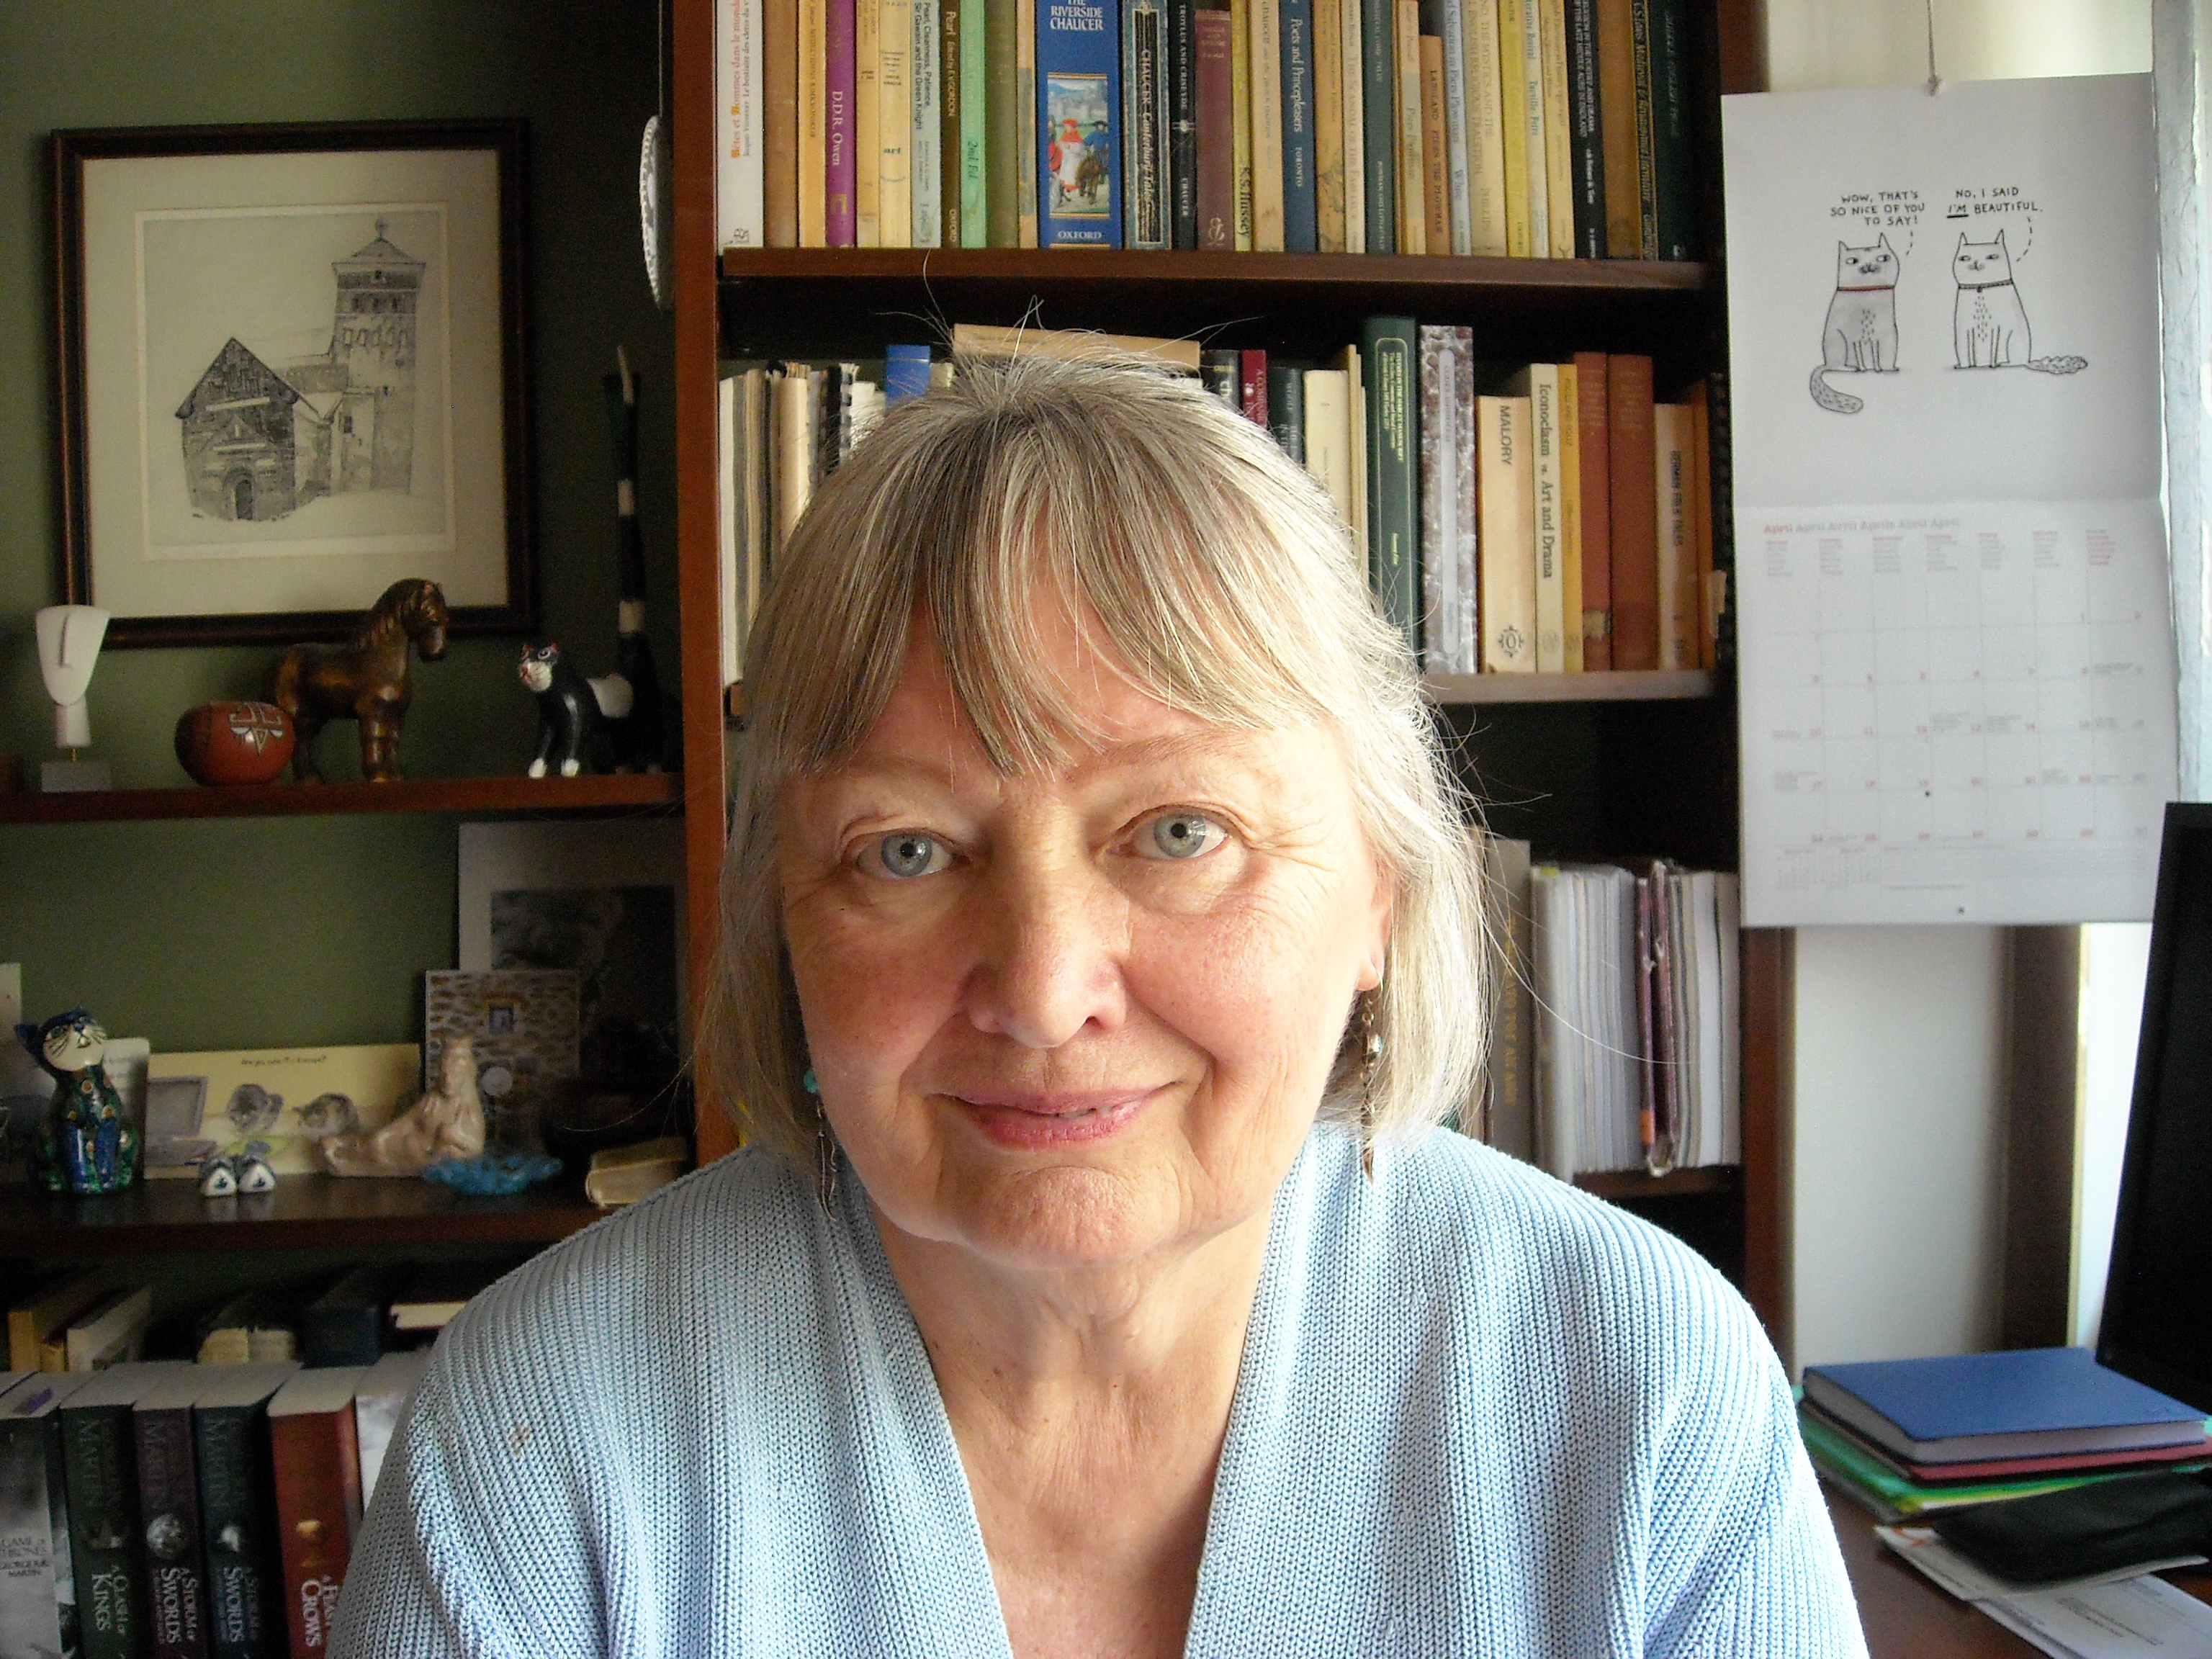 Karin Boklund-Lagopoulou, Professor Emeritus of English and Comparative Literature, Theory of Literature and Methodology of Text Analysis, School of English Language and Literature